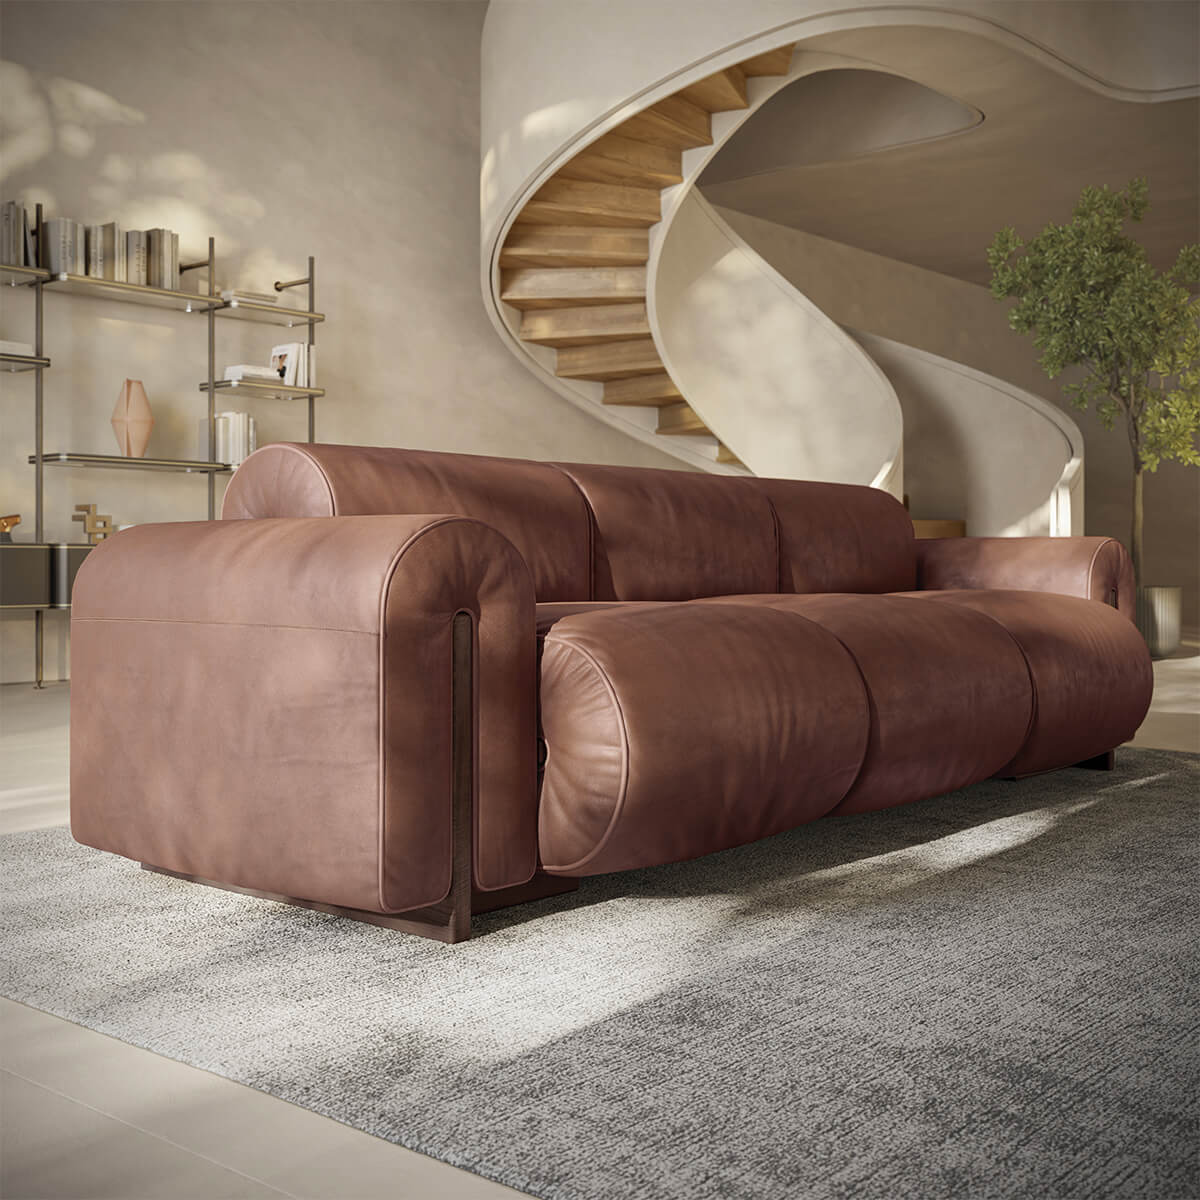 Natuzzi editorial - Colle by BIG — Bjarke Ingels Group